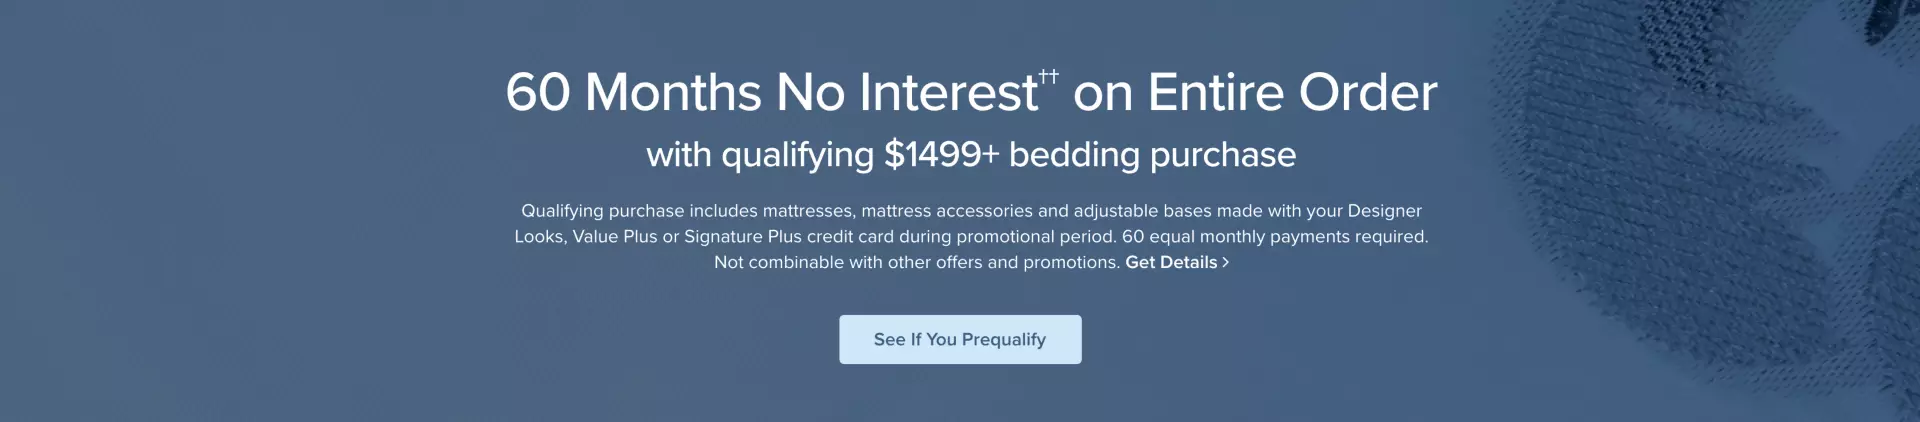 60 Months No Interest on Entire Order - with qualifying $1499+ bedding purchase -- Qualifying purchase includes mattress, mattress accessories and adjustable bases made with your Designer Looks, Value Plus or Signature Plus credit card during promotional period. 60 equal monthly payments required. Not combinable with other offers and promotions. - Get Details